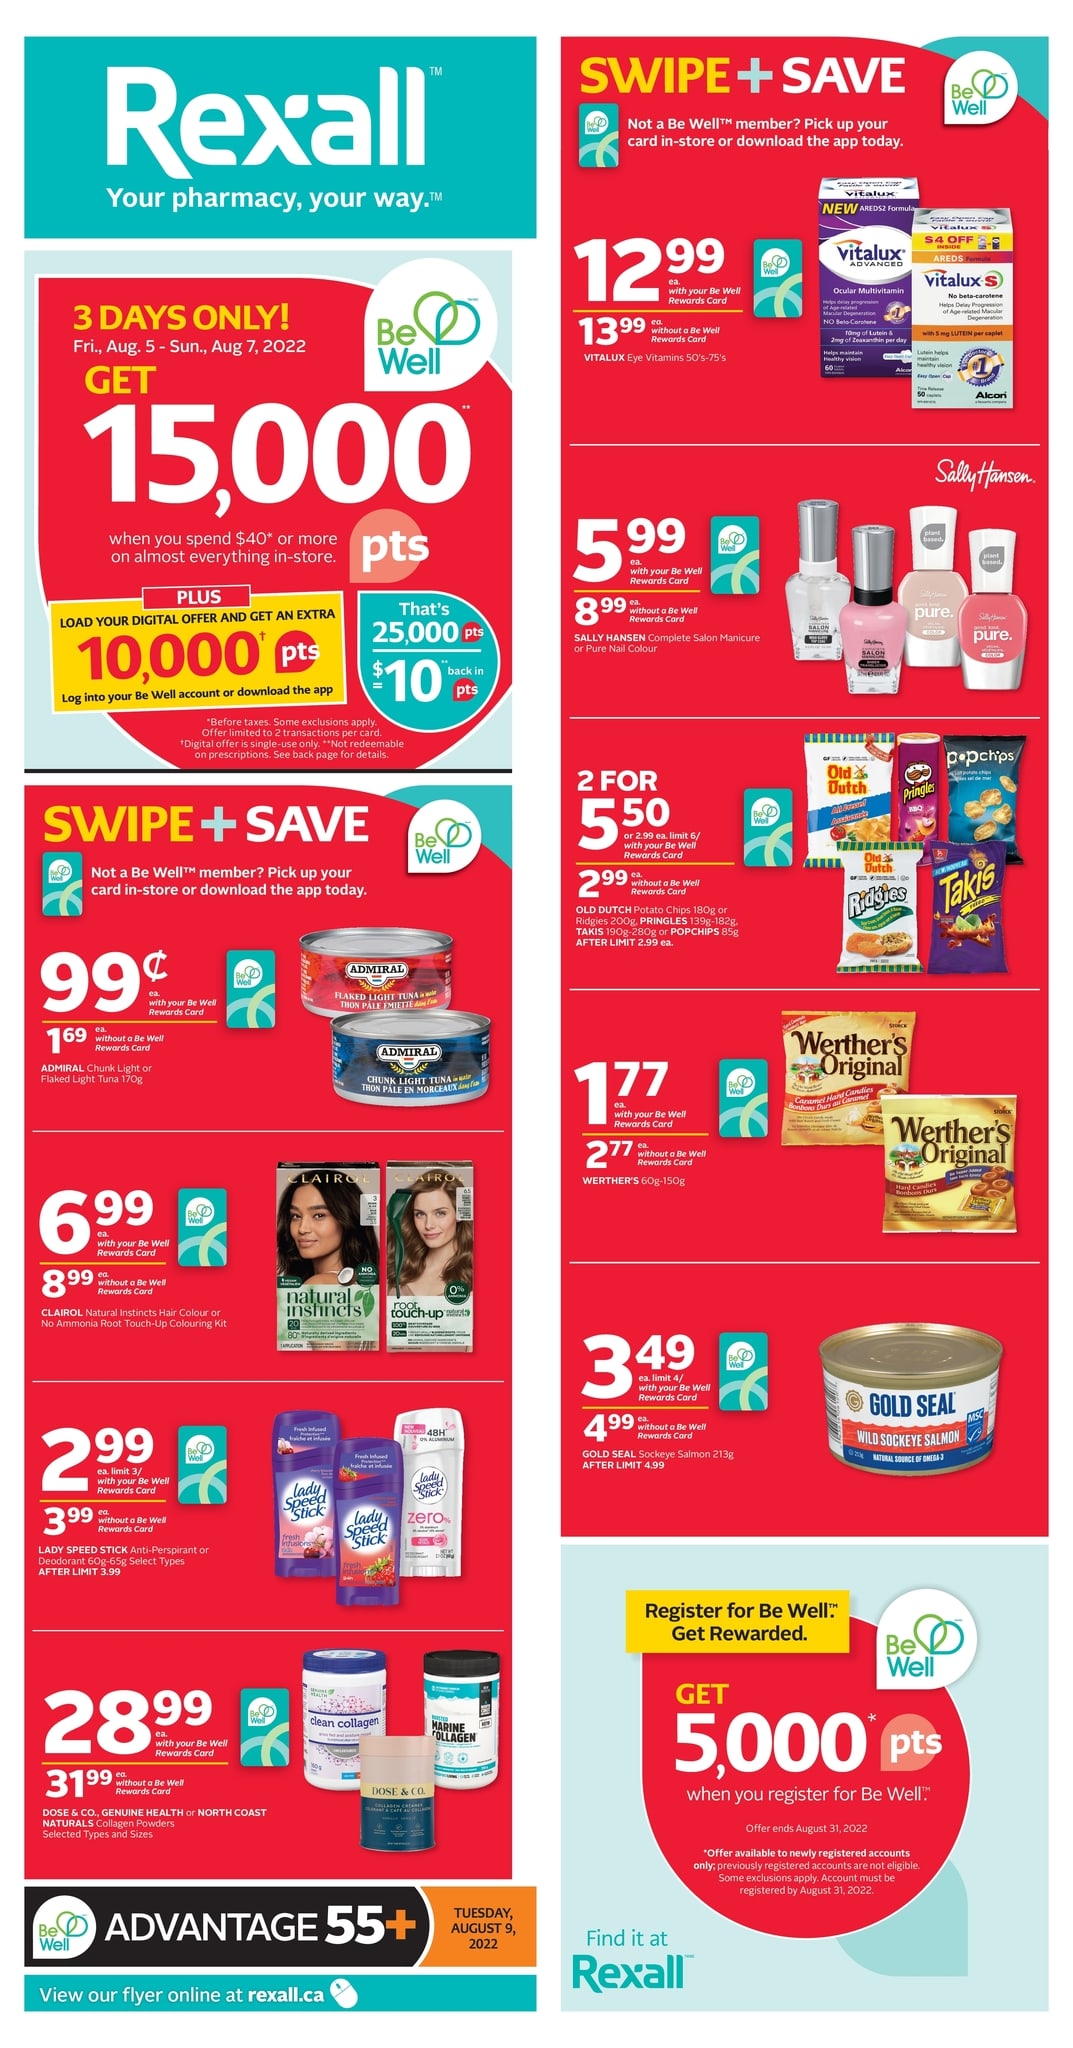 Rexall Flyer - Page 2